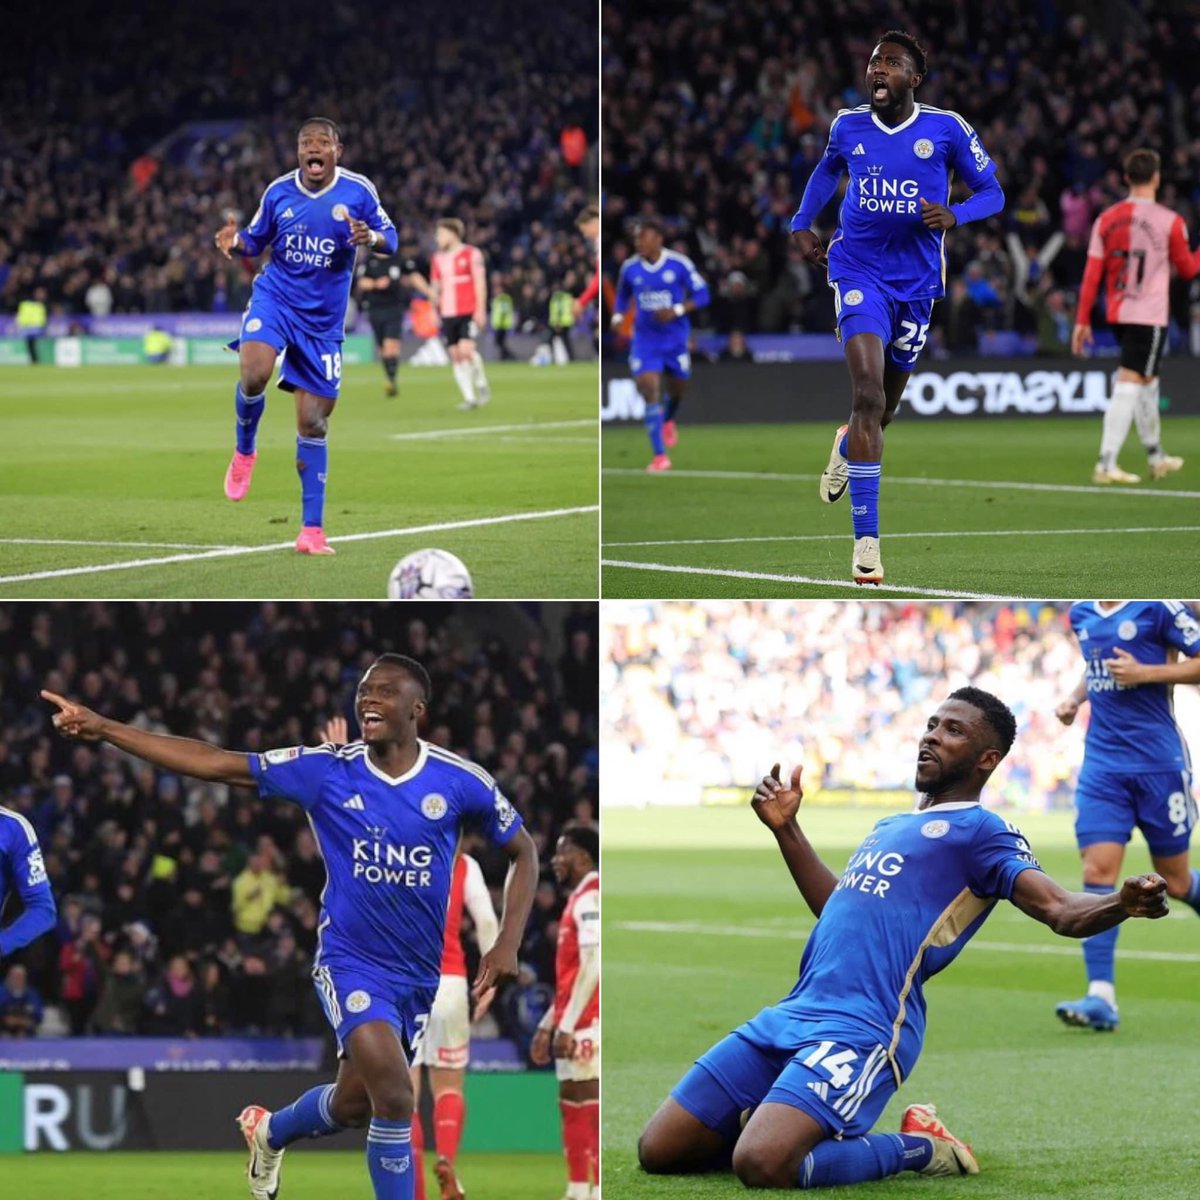 The African quartet of Kelechi Iheanacho and Wilfred Ndidi 🇳🇬, Patson Daka 🇿🇲 and Abdul Fatawu Ishaaku 🇬🇭 have just won the Sky Bet Championship with Leicester City! Congratulations to them 🏆🎉 #LeicesterCity #SkyBetChampionship #Africa #AfricanFootball